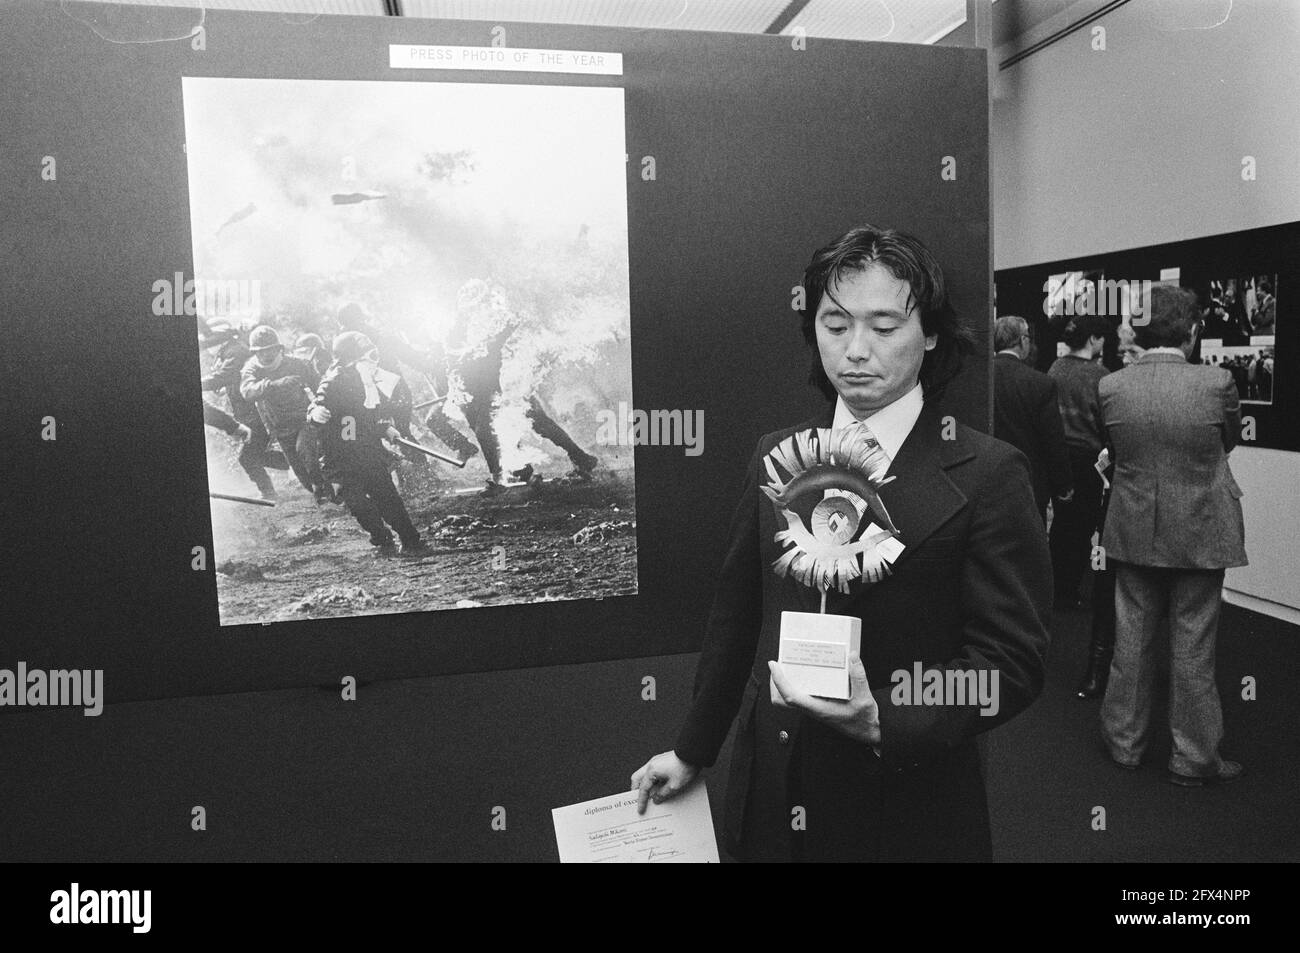 Prize winner Sadayuki Mikami at the winning photo, April 4, 1979, photography, ministers, awards, The Netherlands, 20th century press agency photo, news to remember, documentary, historic photography 1945-1990, visual stories, human history of the Twentieth Century, capturing moments in time Stock Photo